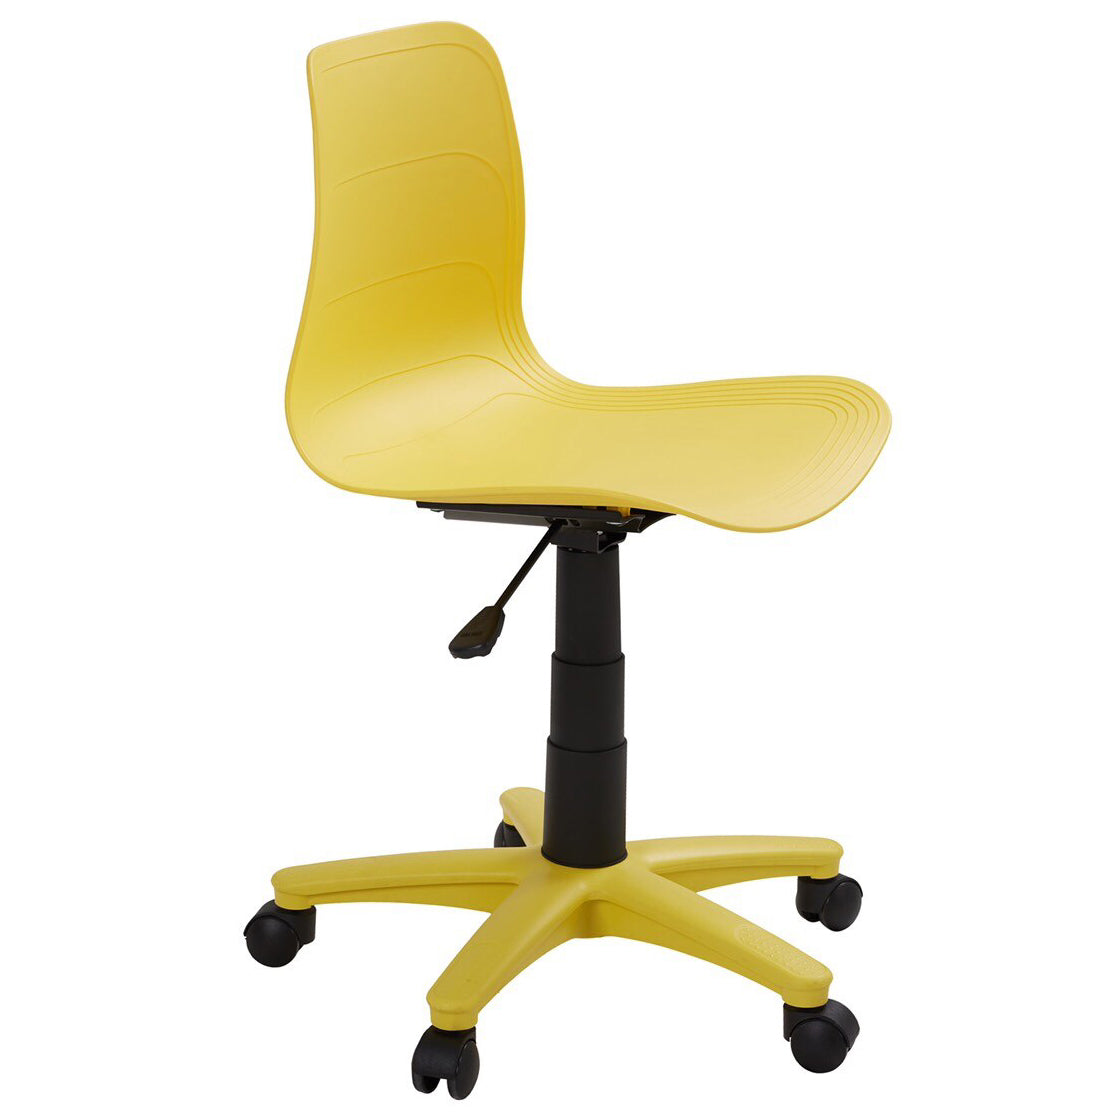 Plastic Swivel Chair Your Ultimate Outdoor Seating Solution (Yellow) HIFUWA-X1